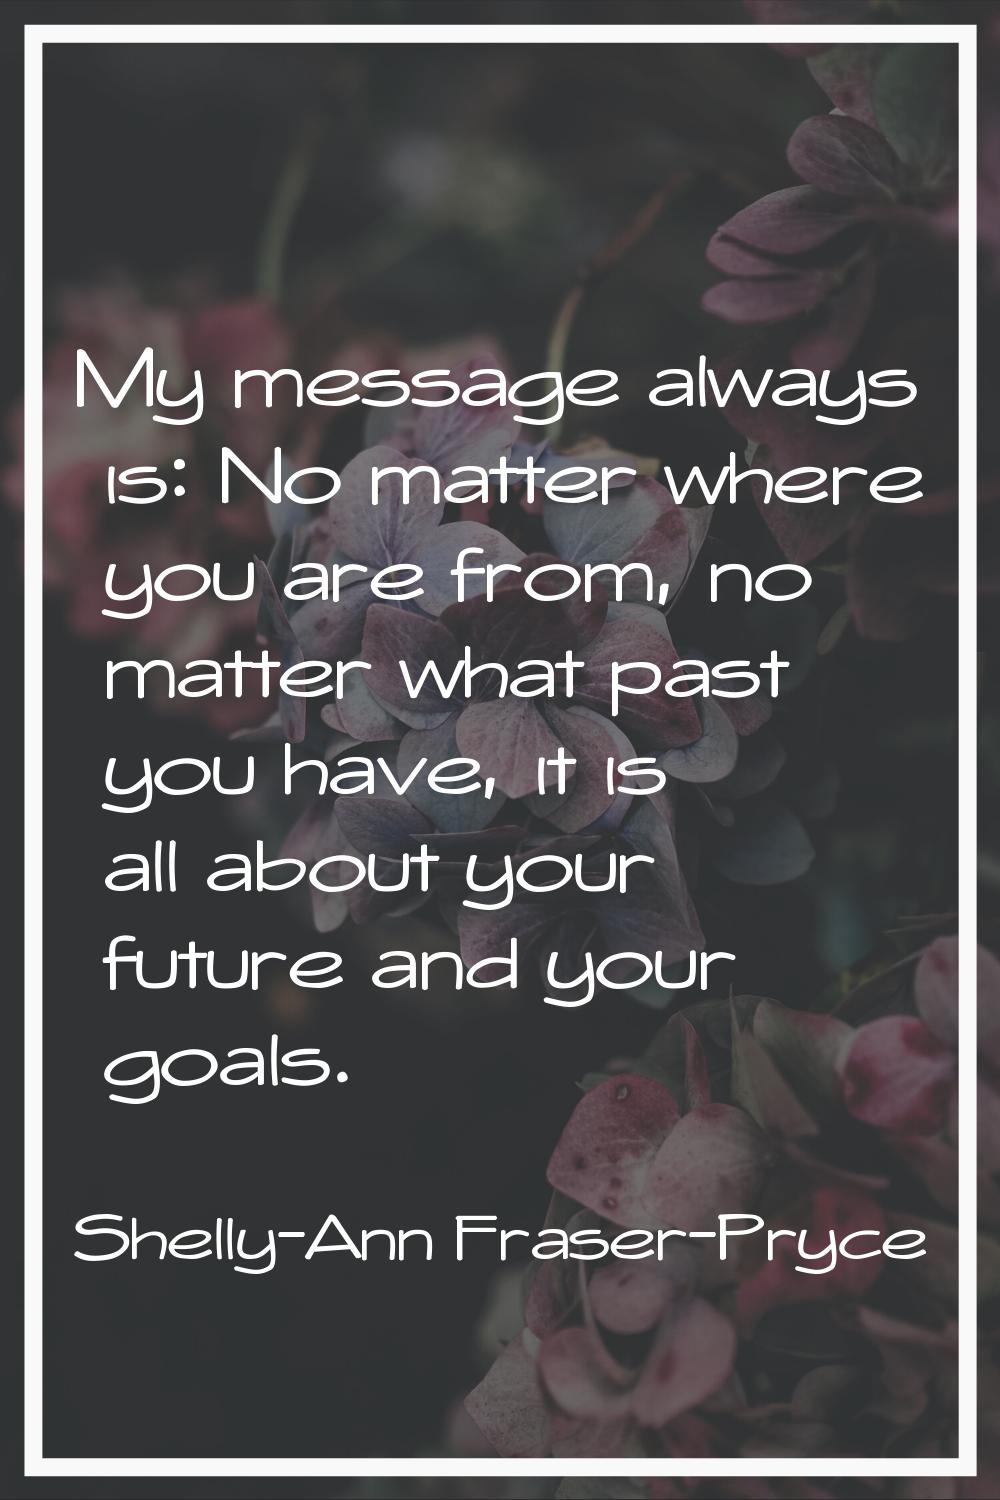 My message always is: No matter where you are from, no matter what past you have, it is all about y